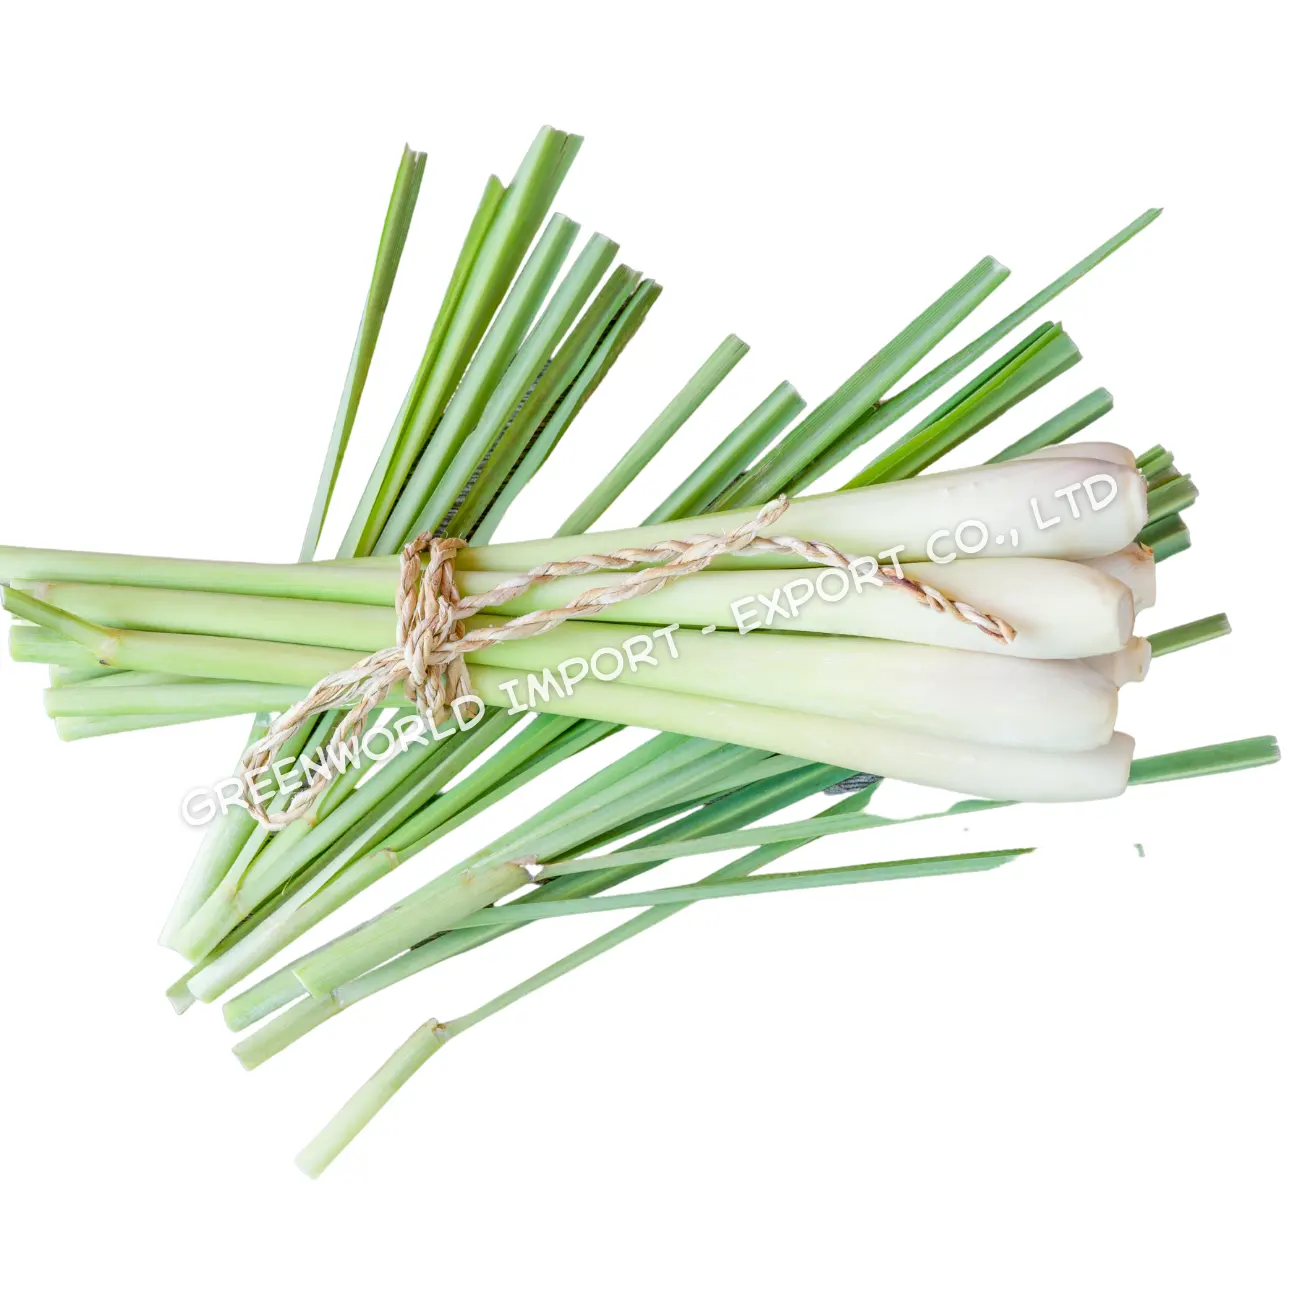 FROZEN LEMON GRASS FROM VIETNAM - CITRONELLA WITH HIGH QUALITY - IQF LEMONGRASS SPICES FOR FOOD, HERB AND TEA